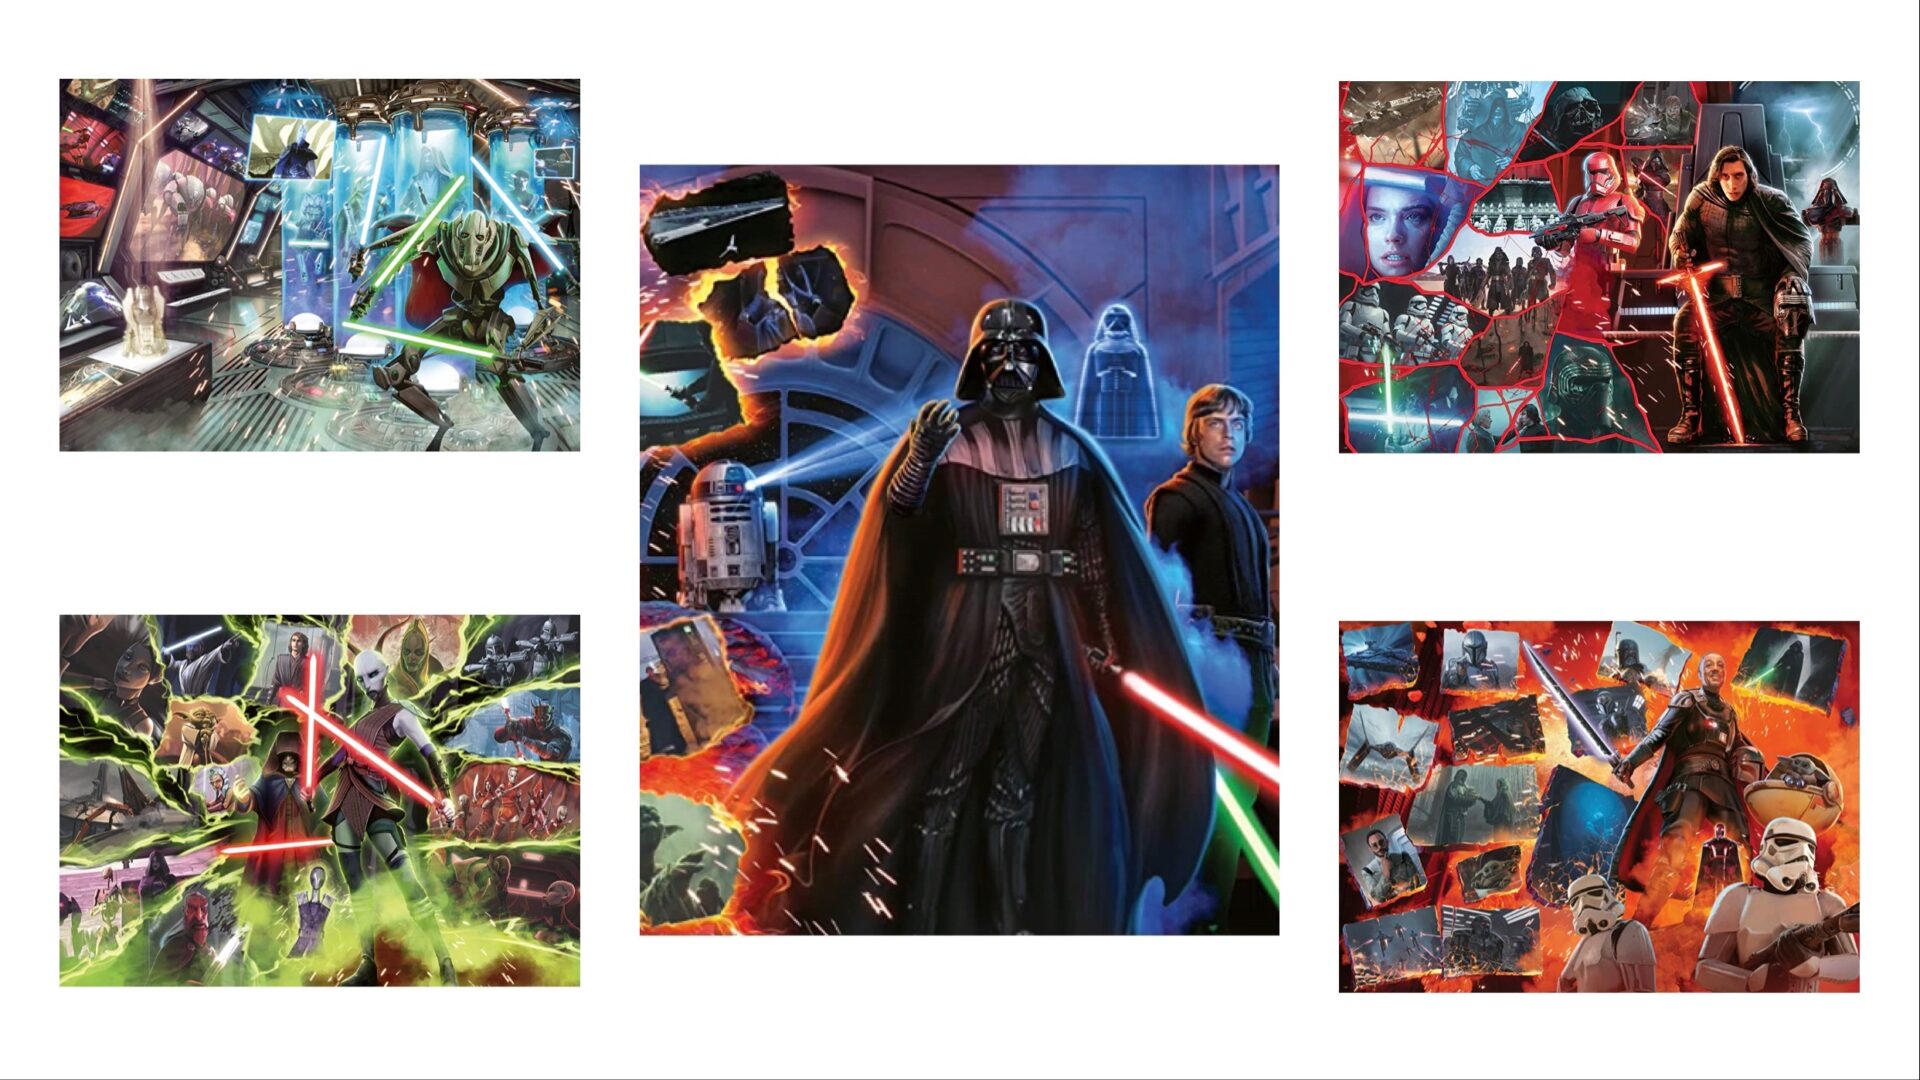 Join The Dark Side With The Ravensburger Star Wars Villainous Puzzles Available Now!